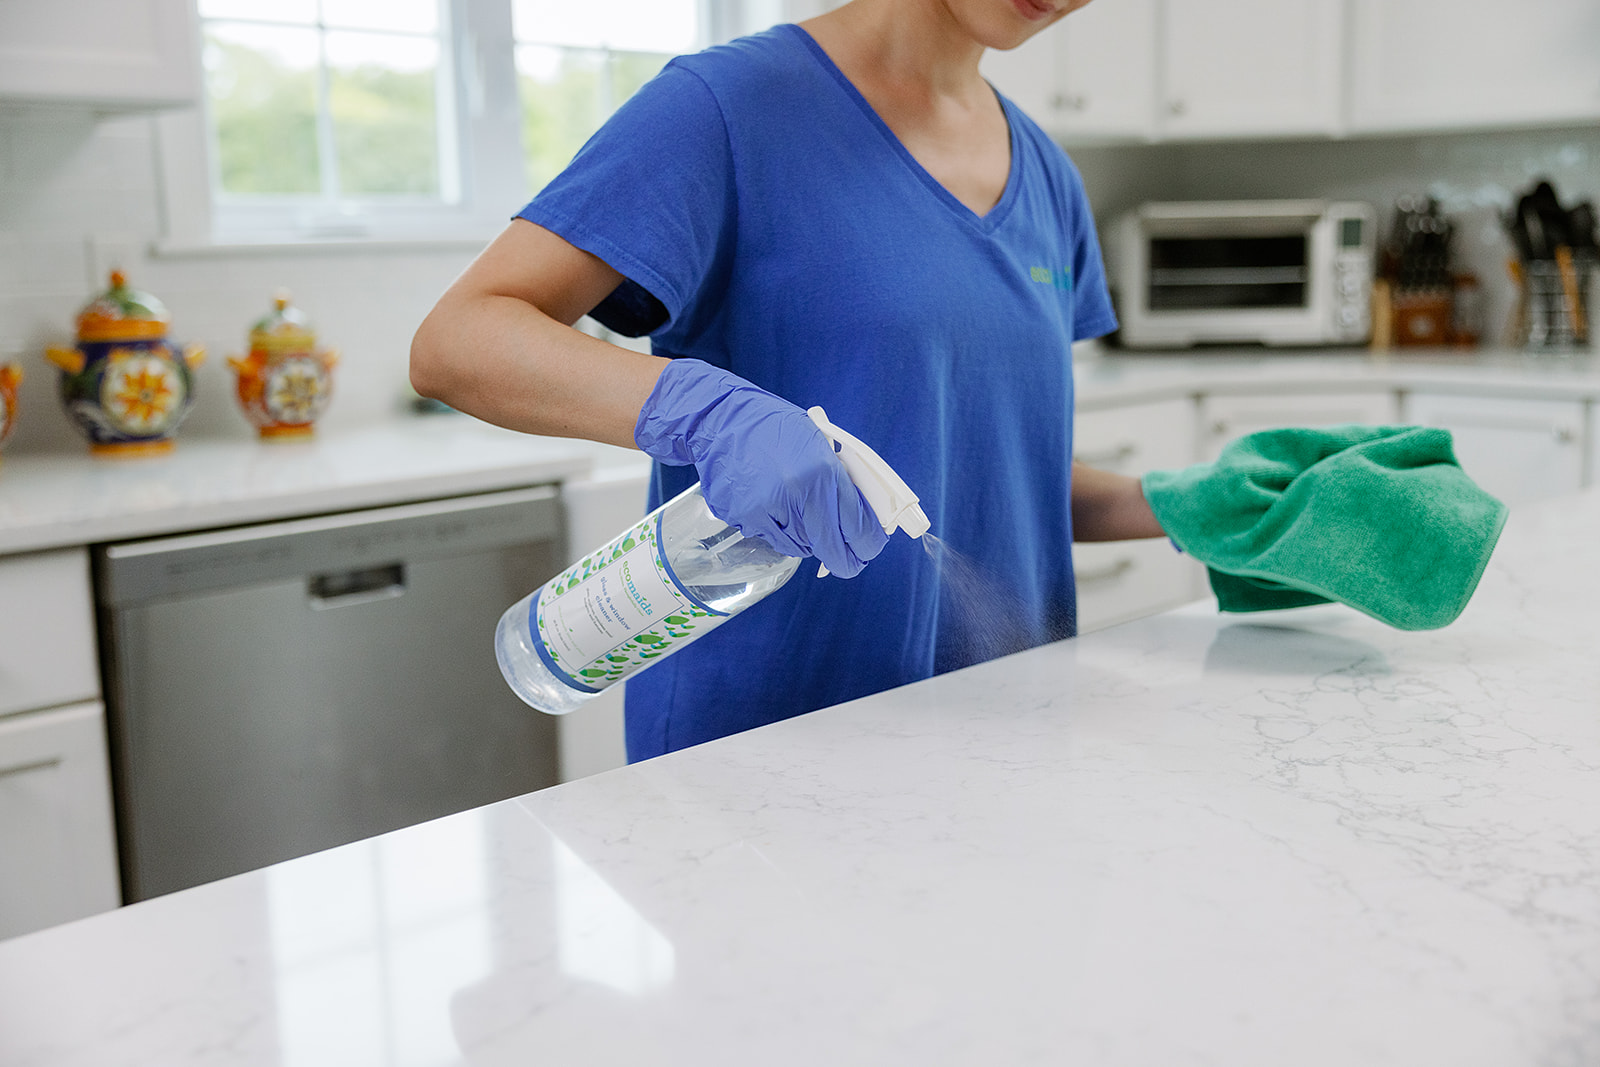 Maid Services in Naples